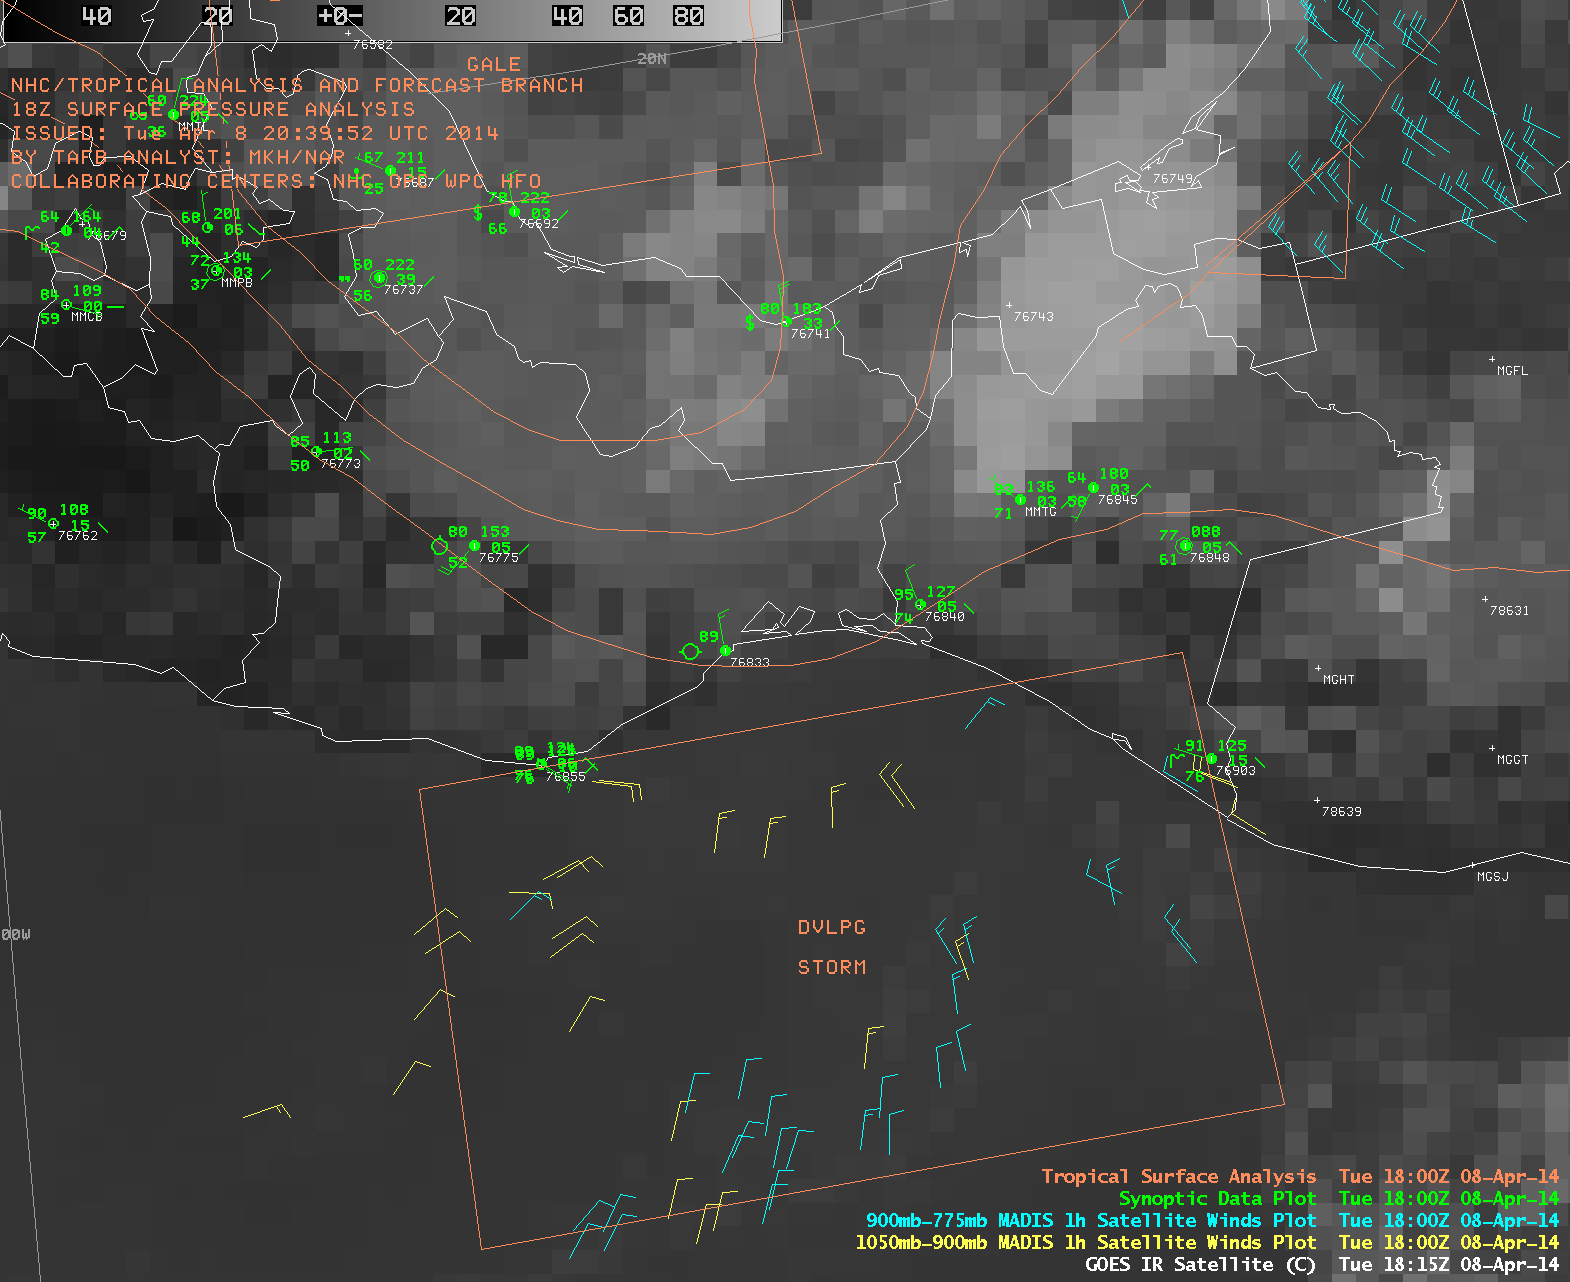 GOES-13 10.7 Âµm IR images with MADIS 1-hour satellite winds (click to play animation)